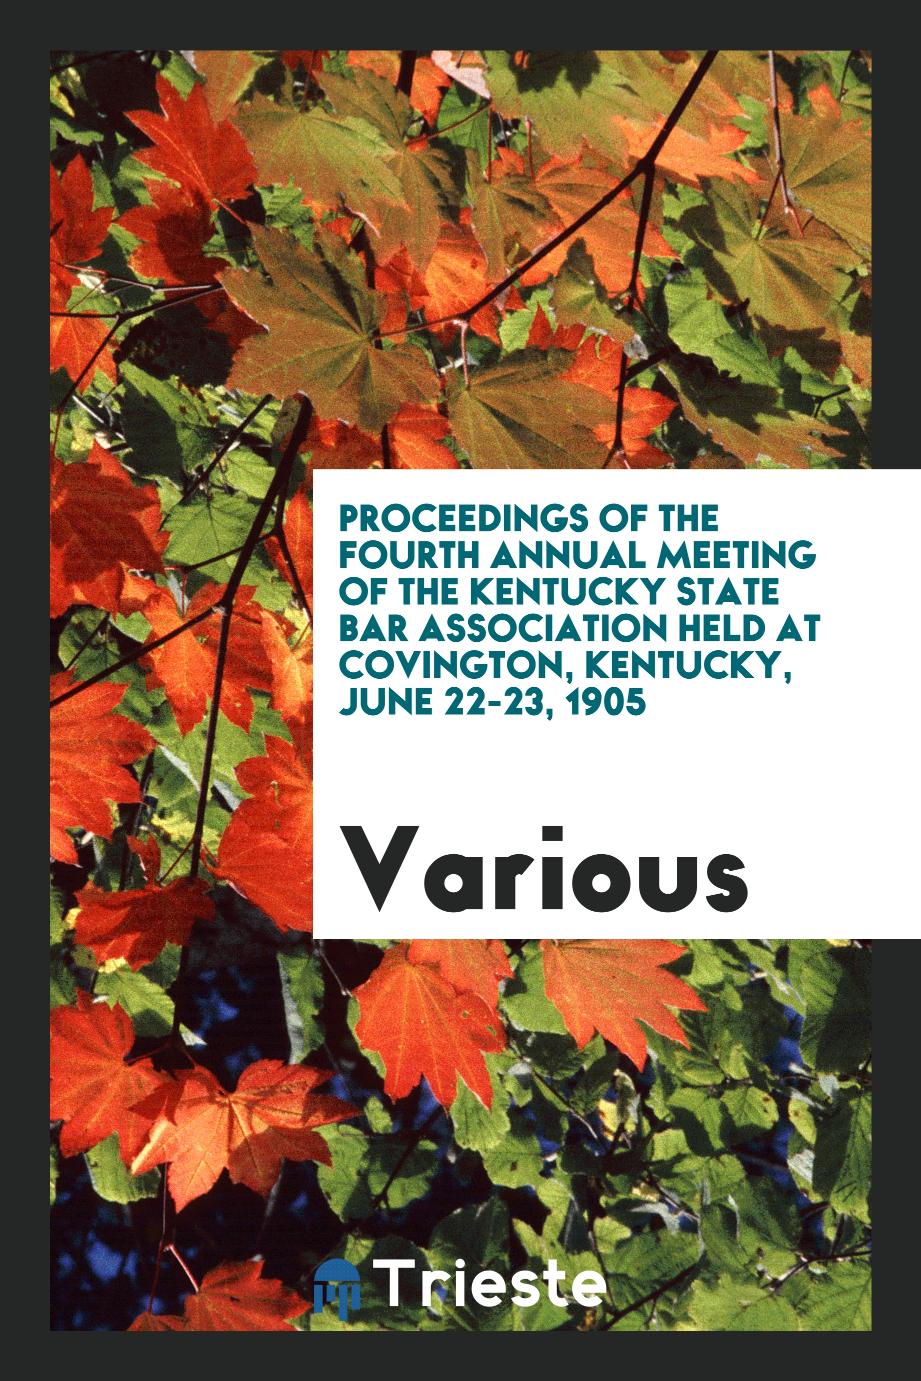 Proceedings of the Fourth Annual Meeting of the Kentucky State Bar Association Held at Covington, Kentucky, June 22-23, 1905